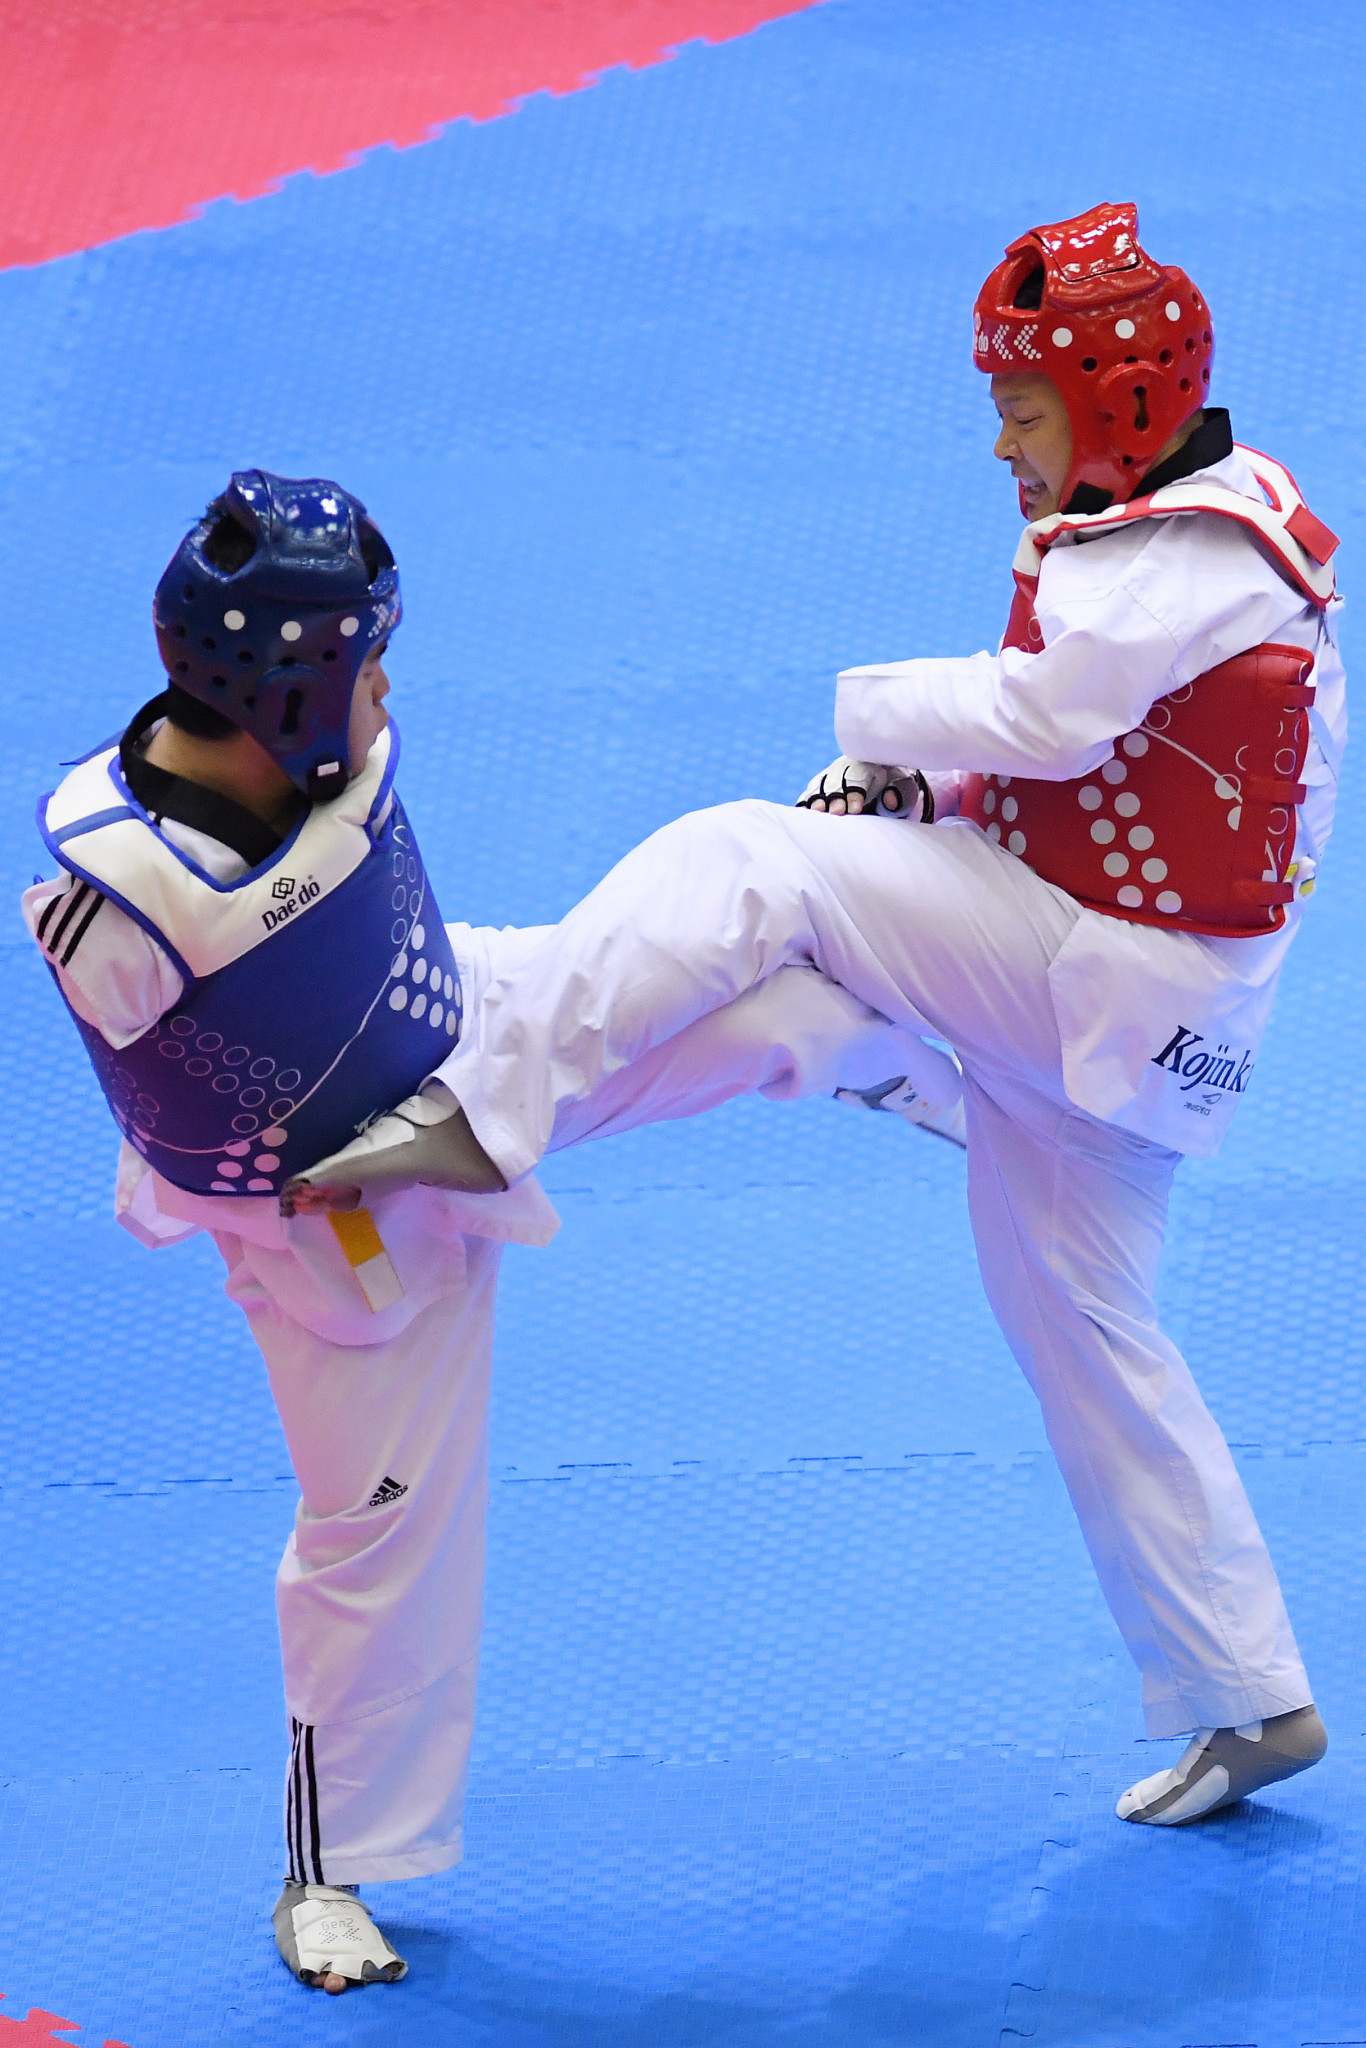 Taekwondo is due to make its Paralympic debut at the re-arranged Tokyo 2020 next year ©Getty Images